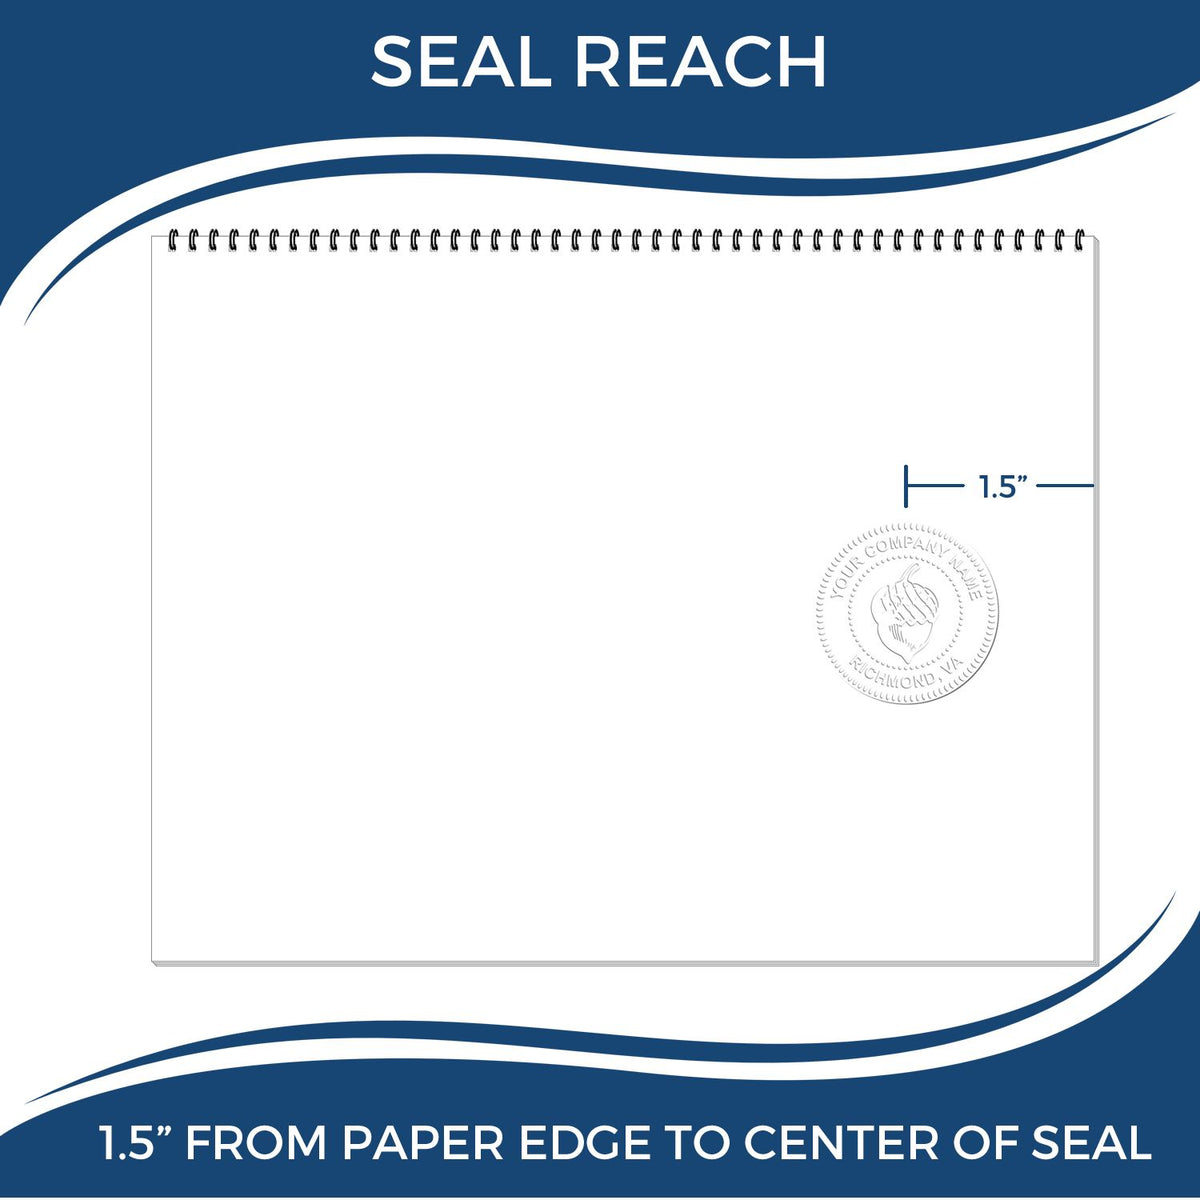 An infographic showing the seal reach which is represented by a ruler and a miniature seal image of the Hybrid New York Engineer Seal